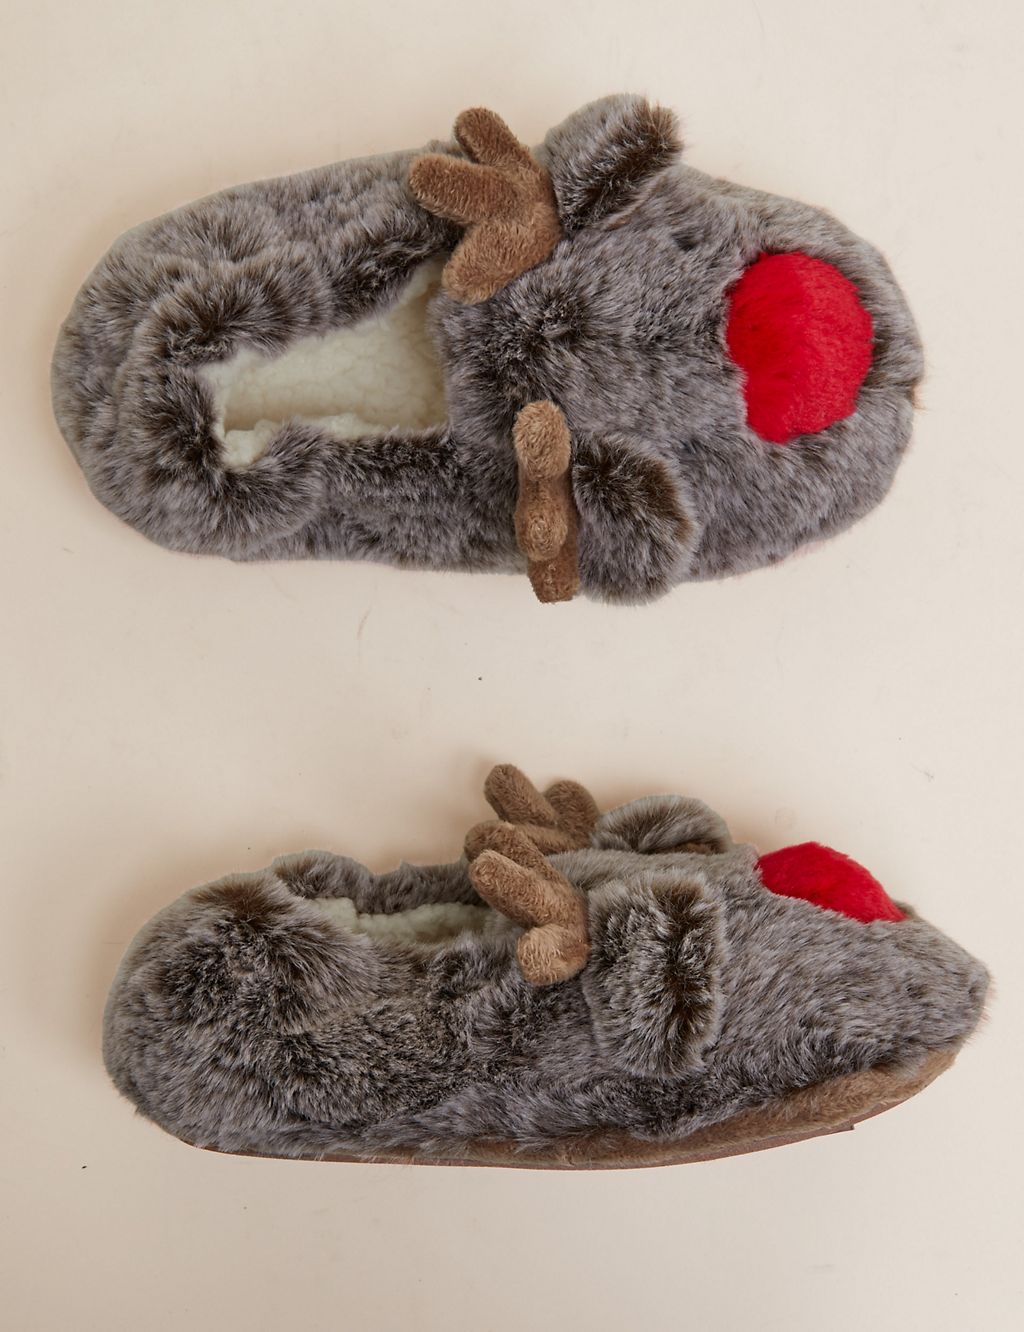 Kids' Reindeer Christmas Slippers (5 Small - 6 Large) 1 of 5